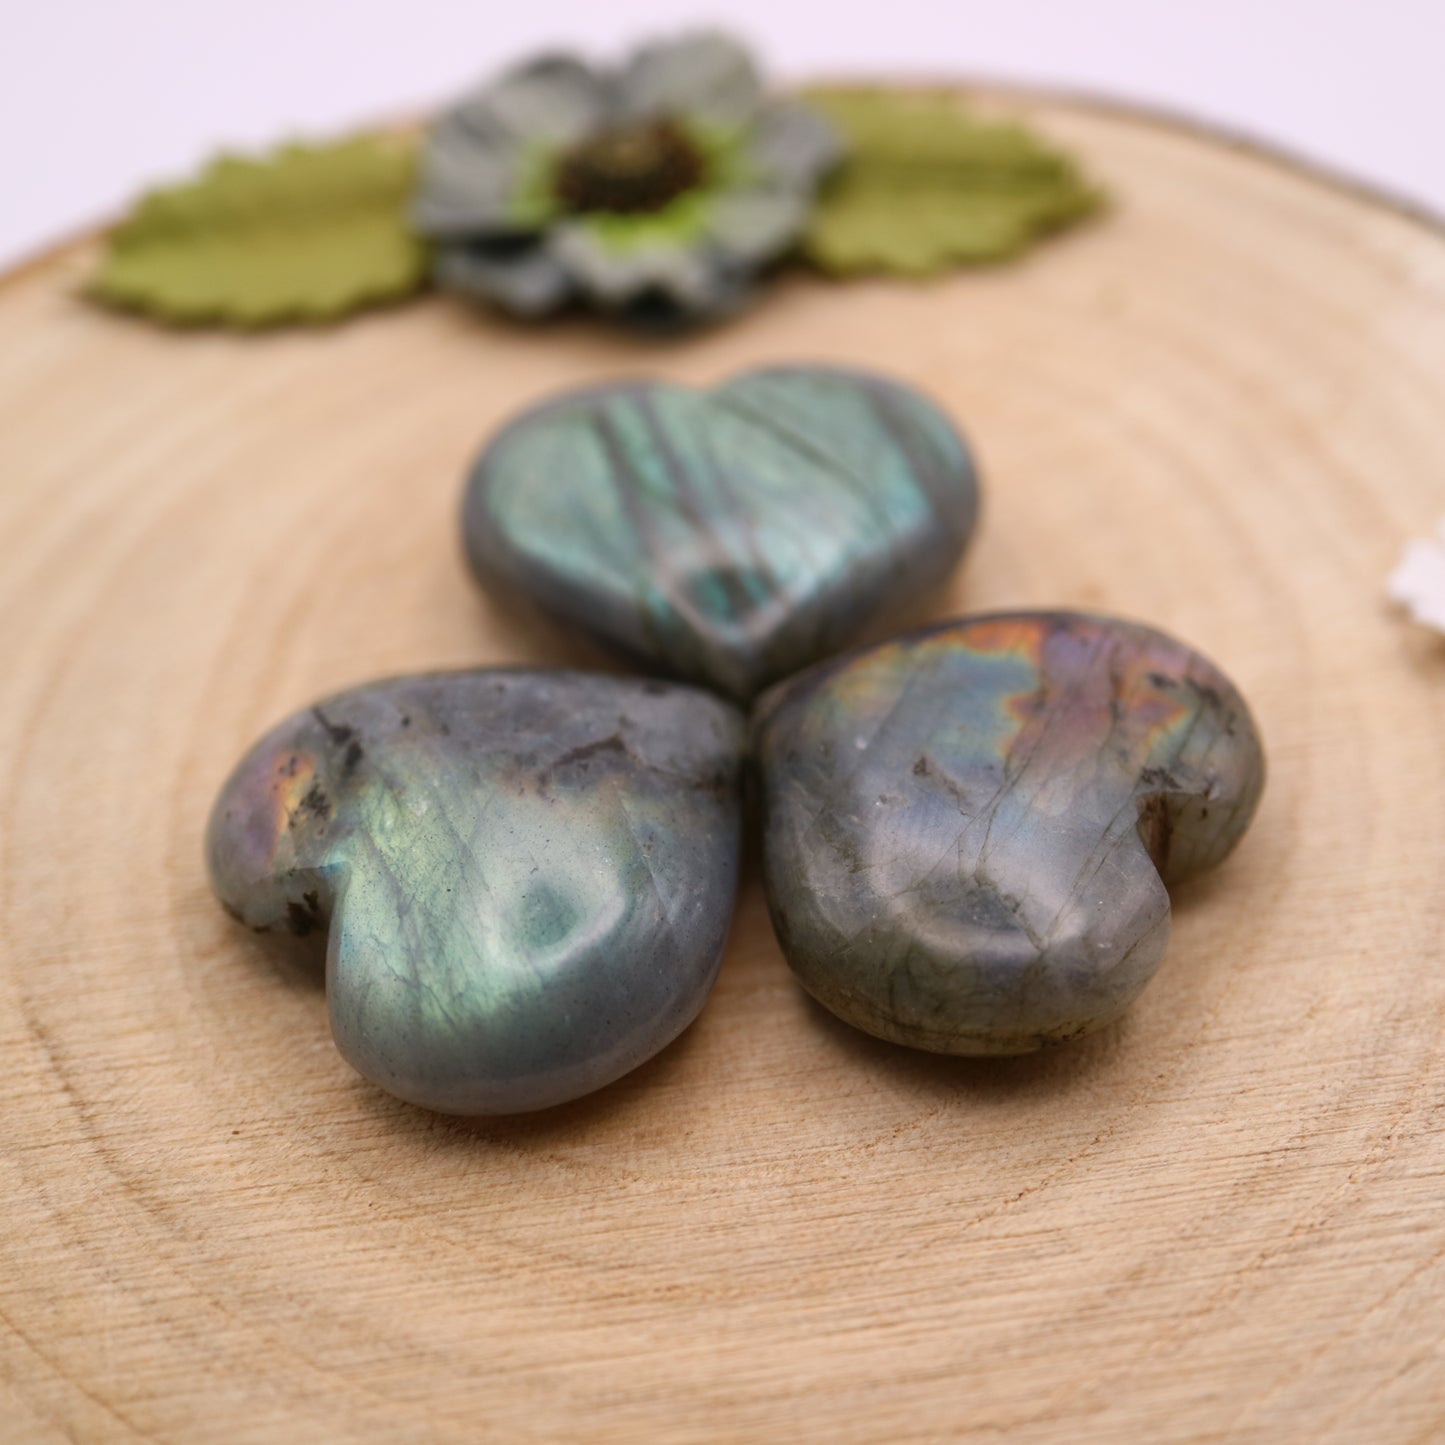 Three pieces of Labradorite crystal in the shape of a heart put together